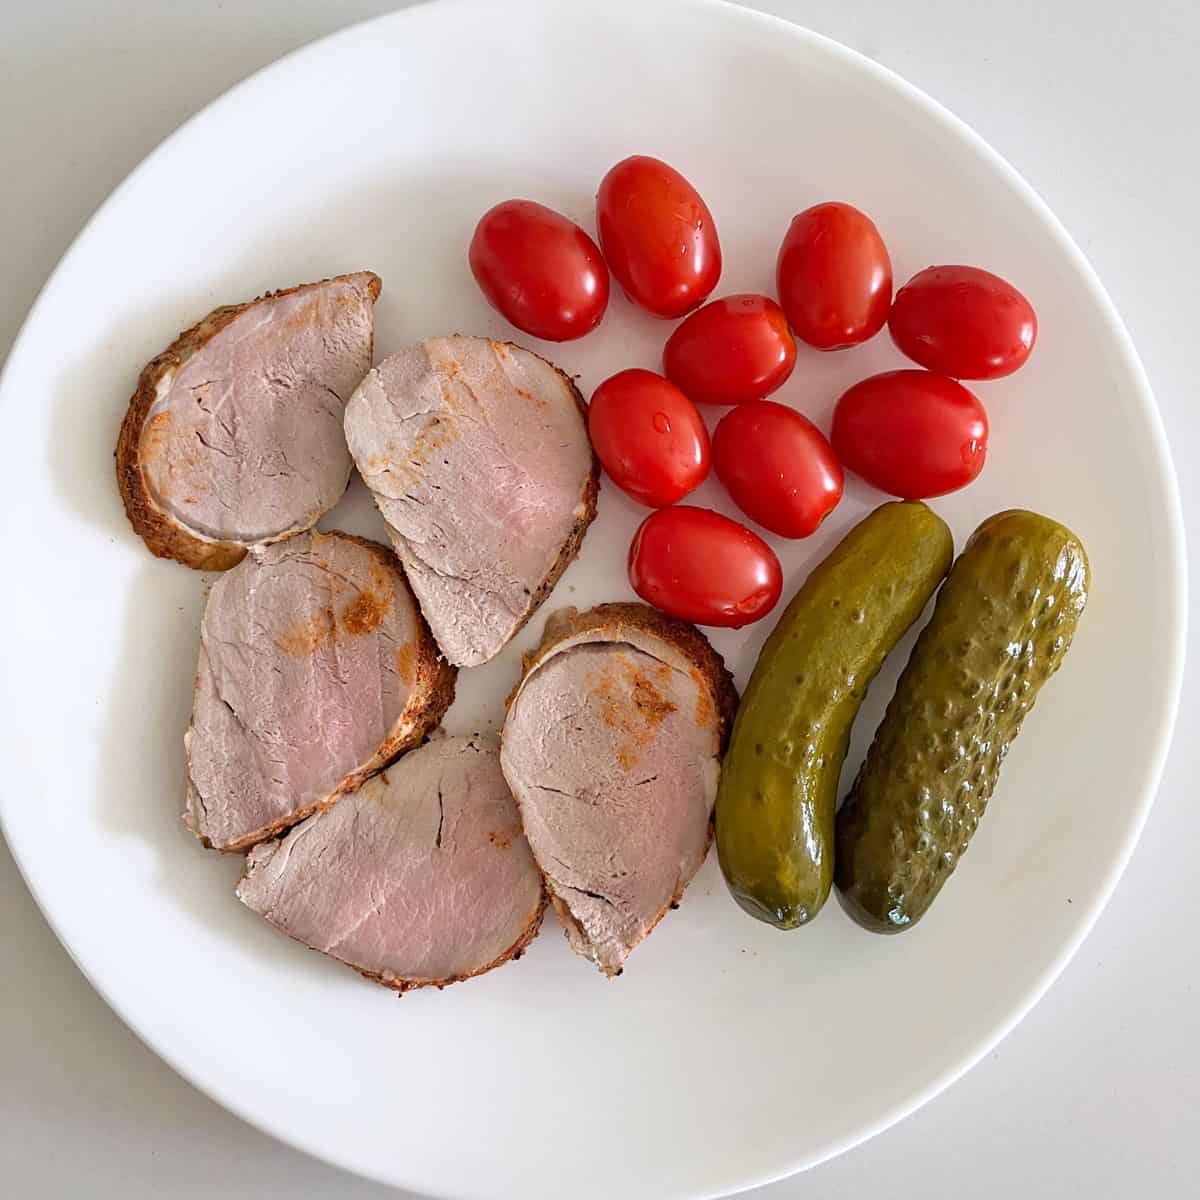 Roasted pork tenderloin leftovers are served with cherry tomatoes and dill pickles.